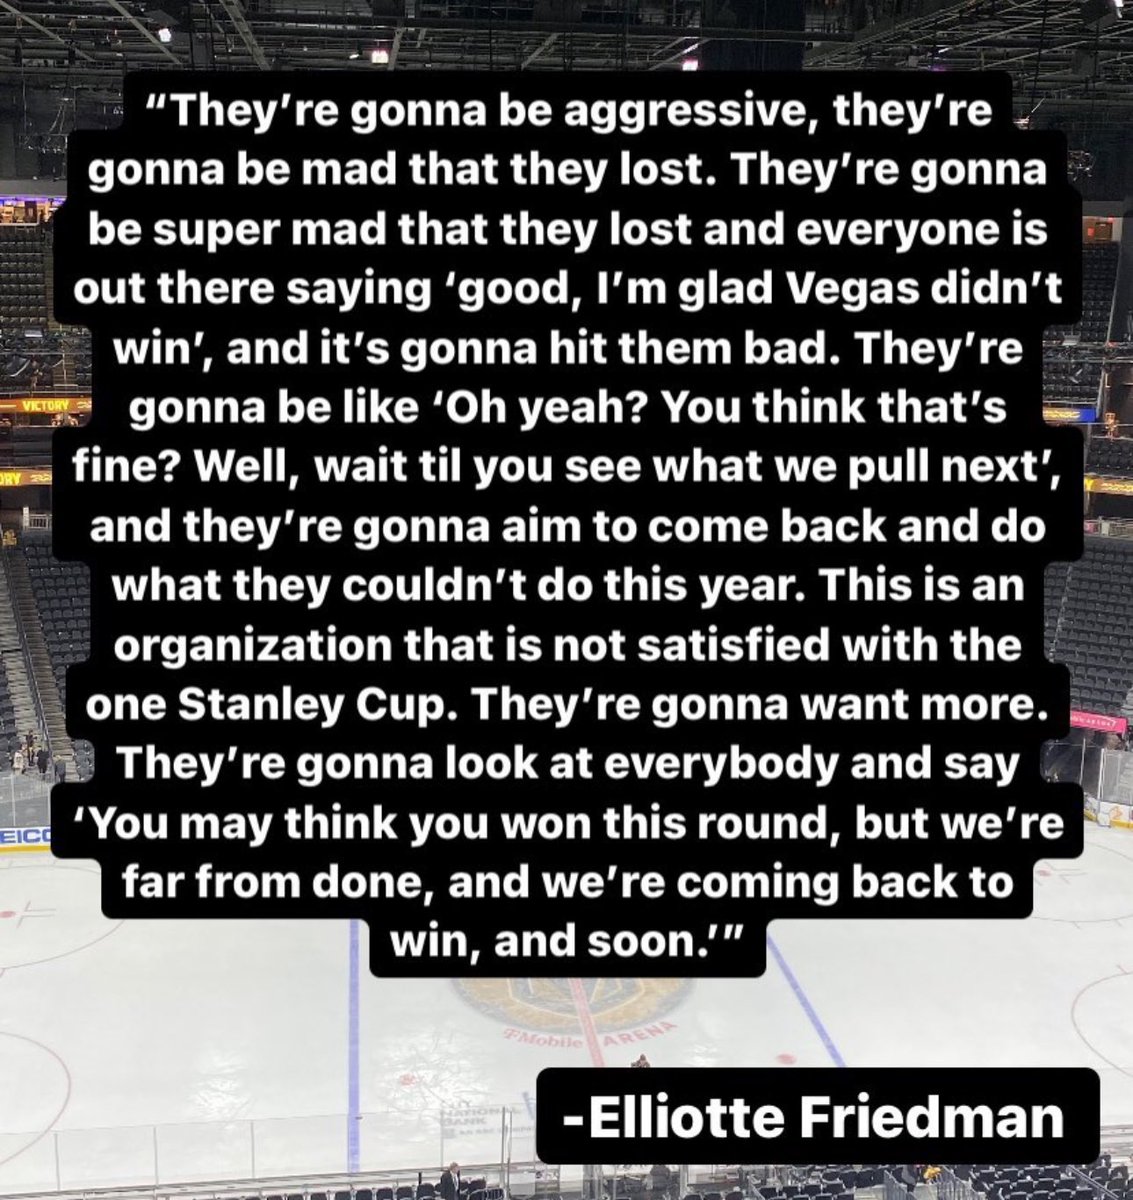 That’s why we love our team and our city, they’re retooling and will be back #VegasStrong next season and ready to compete again. #VegasBorn we can all sit back and relax until October and it’s on again! If your team is still playing , Good Luck and enjoy the ride!